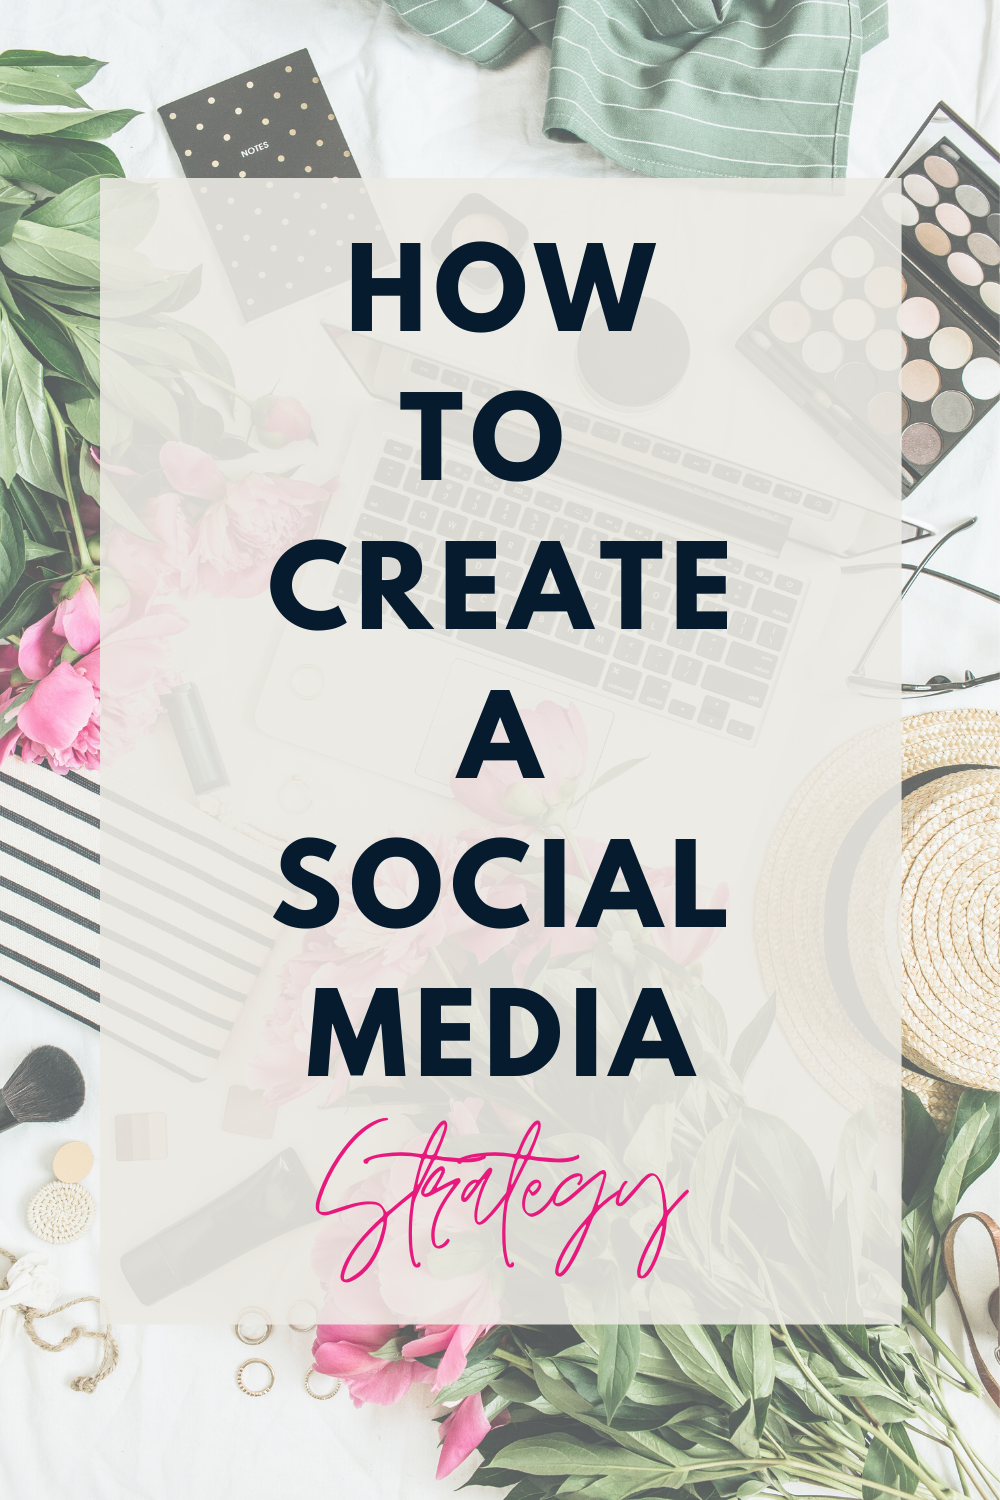 How To Create A Social Media Strategy Guide Download | Elle Blonde Luxury Lifestyle Destination Blog